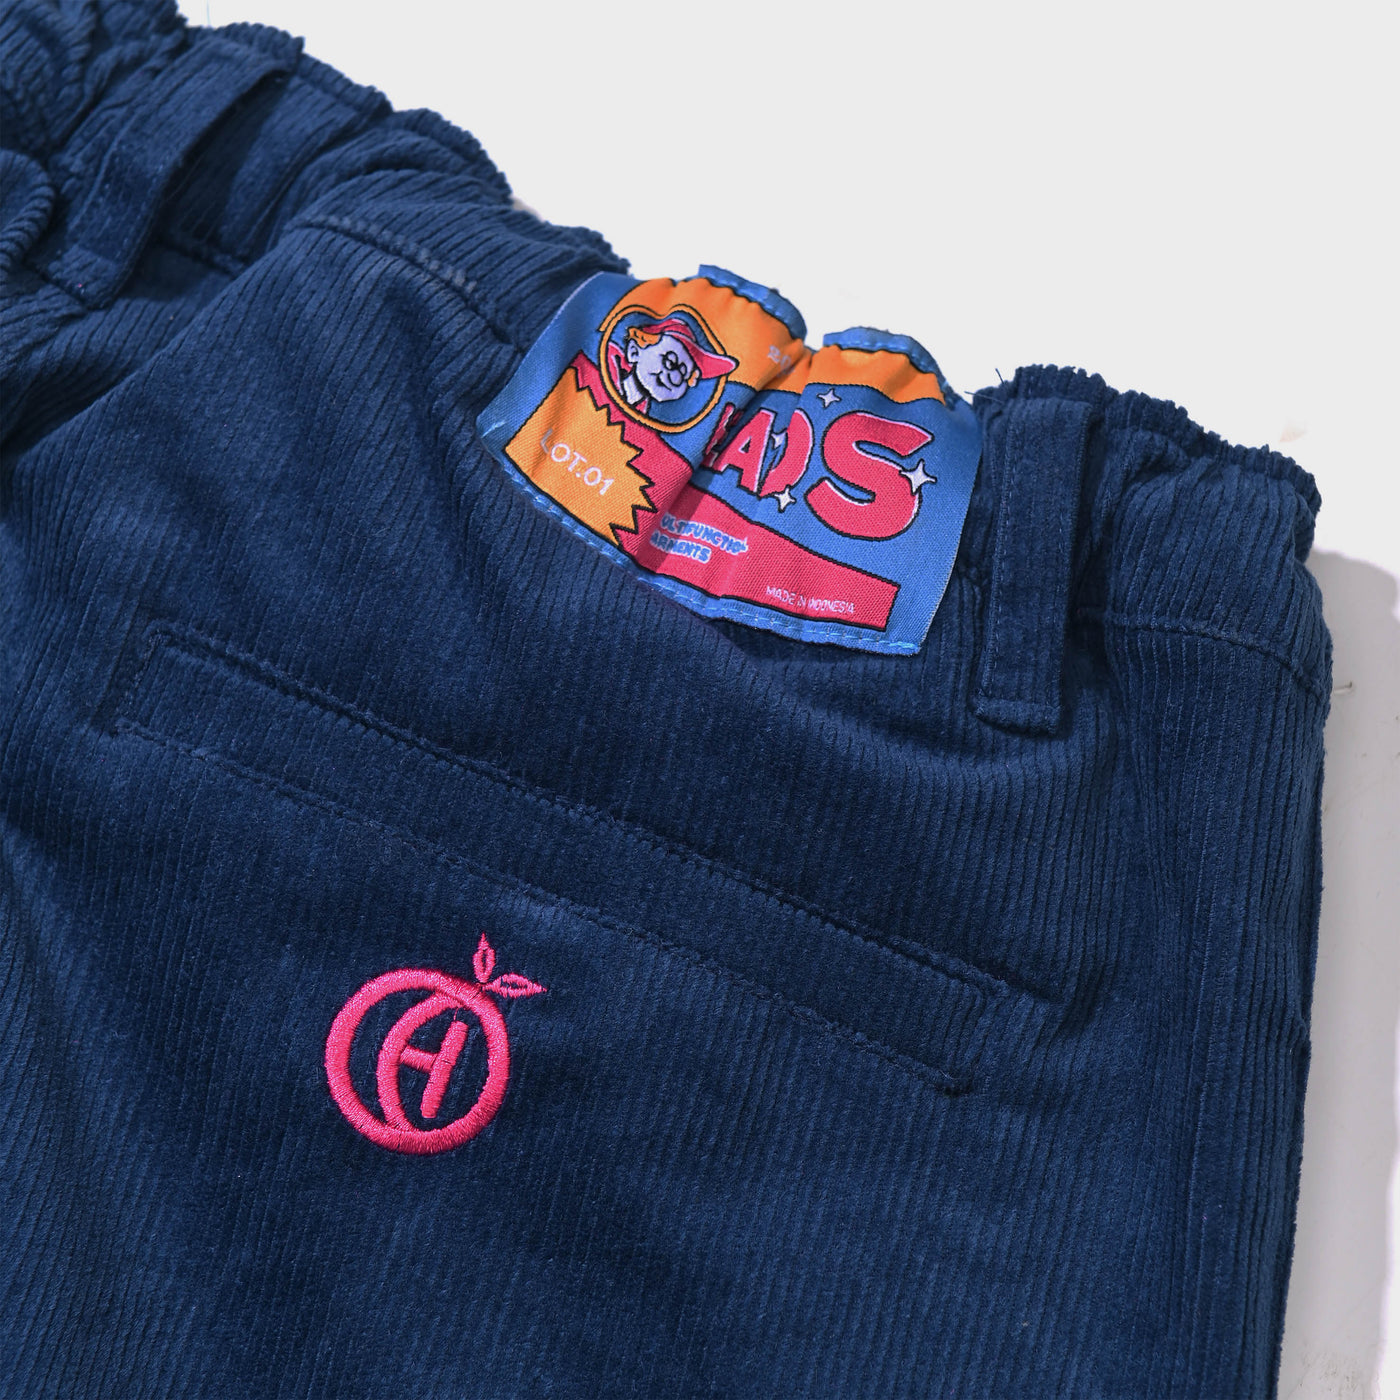 Spread Baggy Cell Pocket Pants Blue